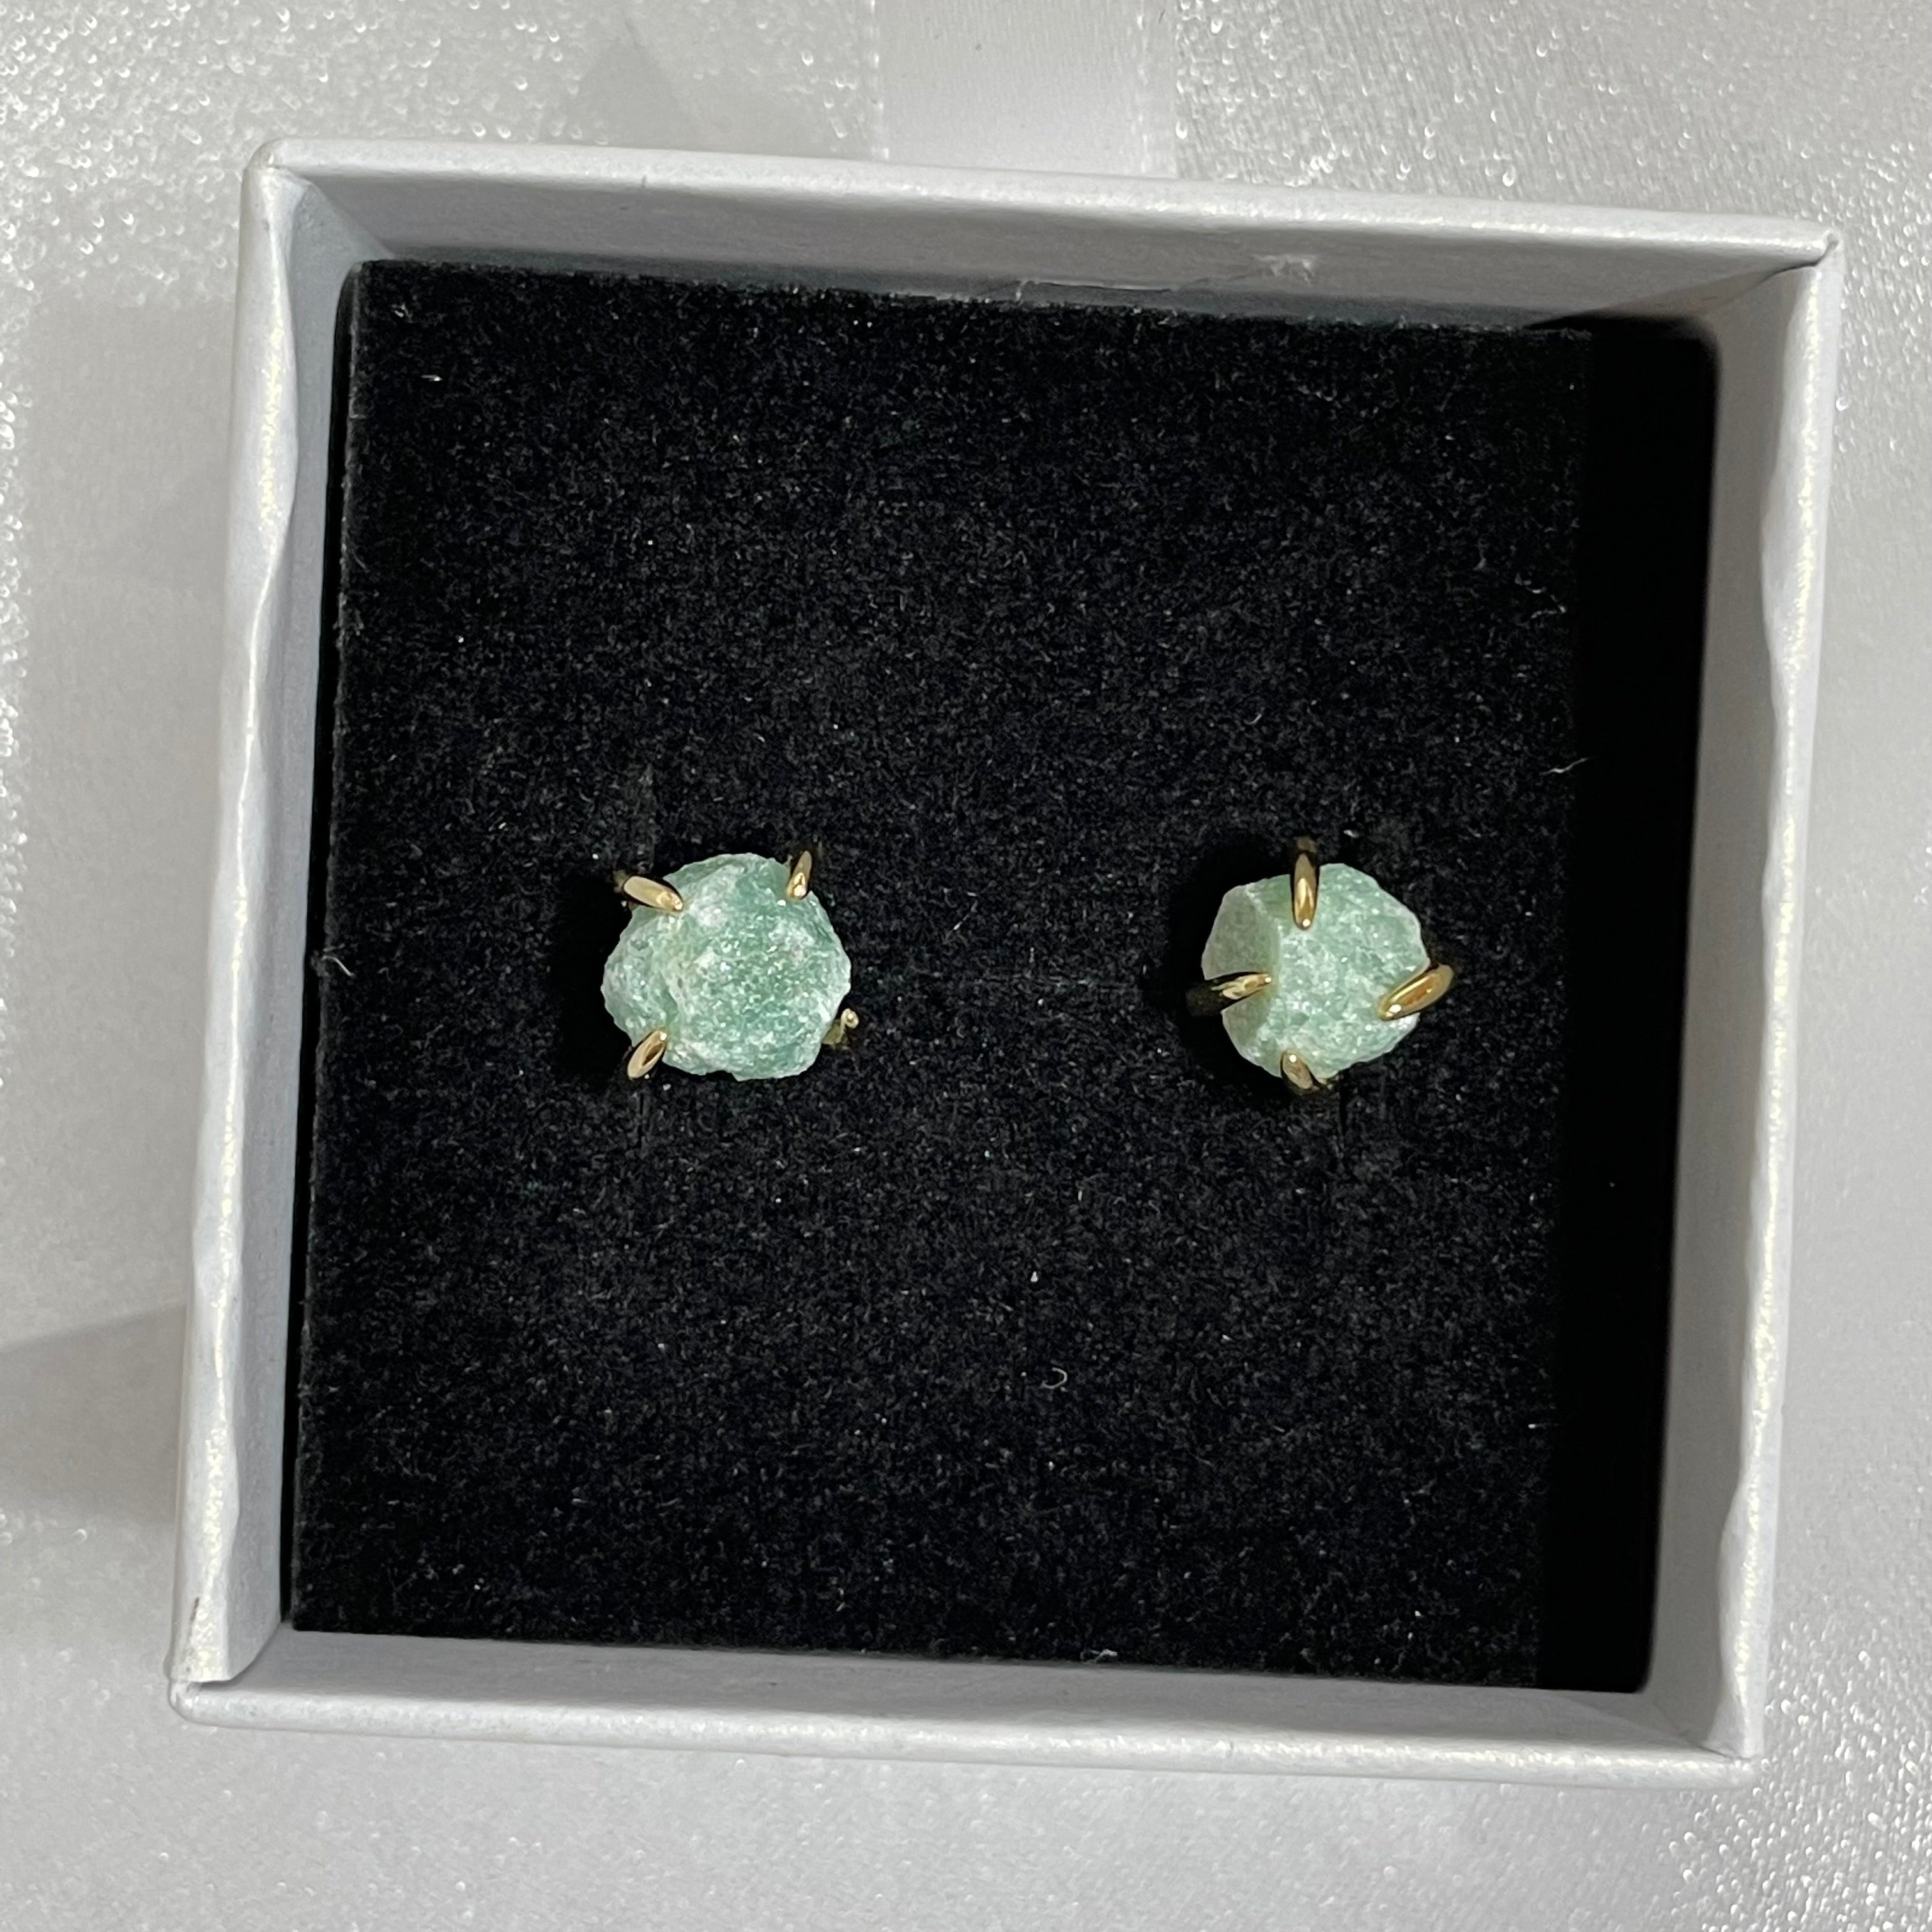 RAW Frosted Green Aventurine Crystal Stud Packs | 14kt Gold